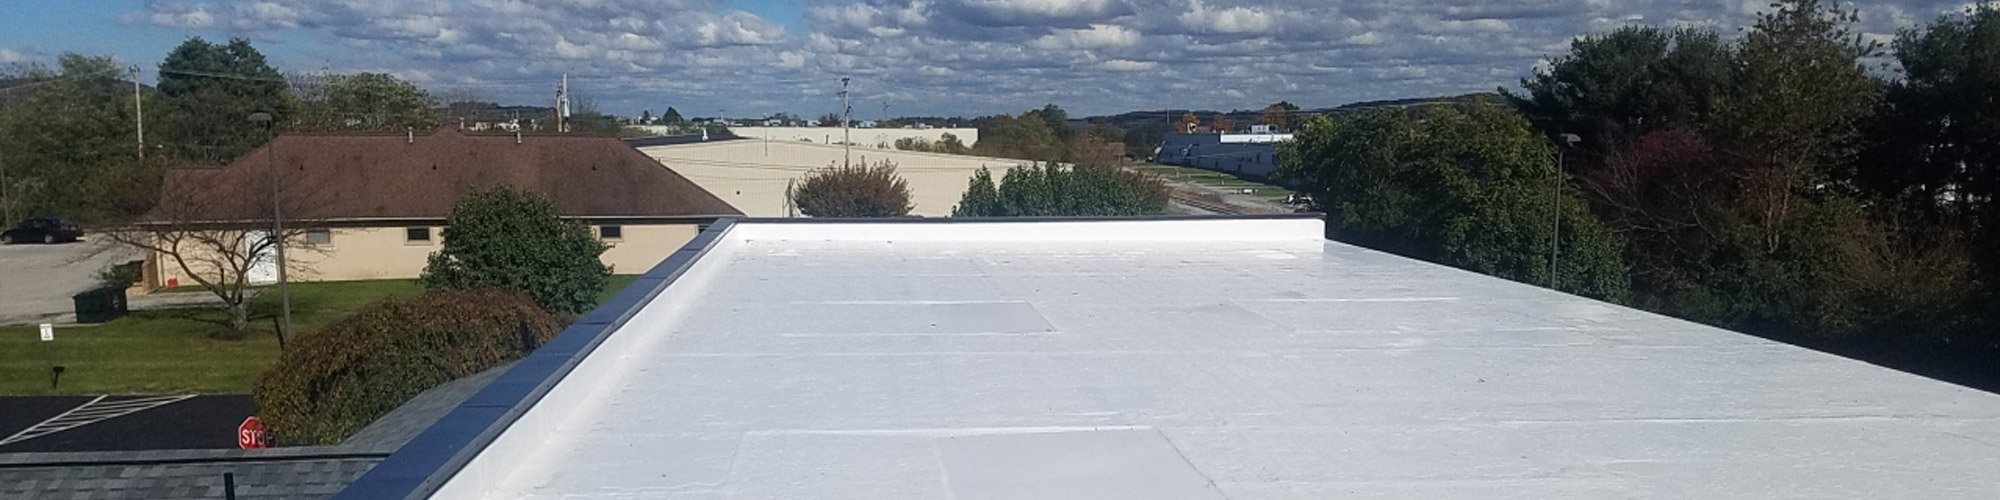 flat commercial roof with coating